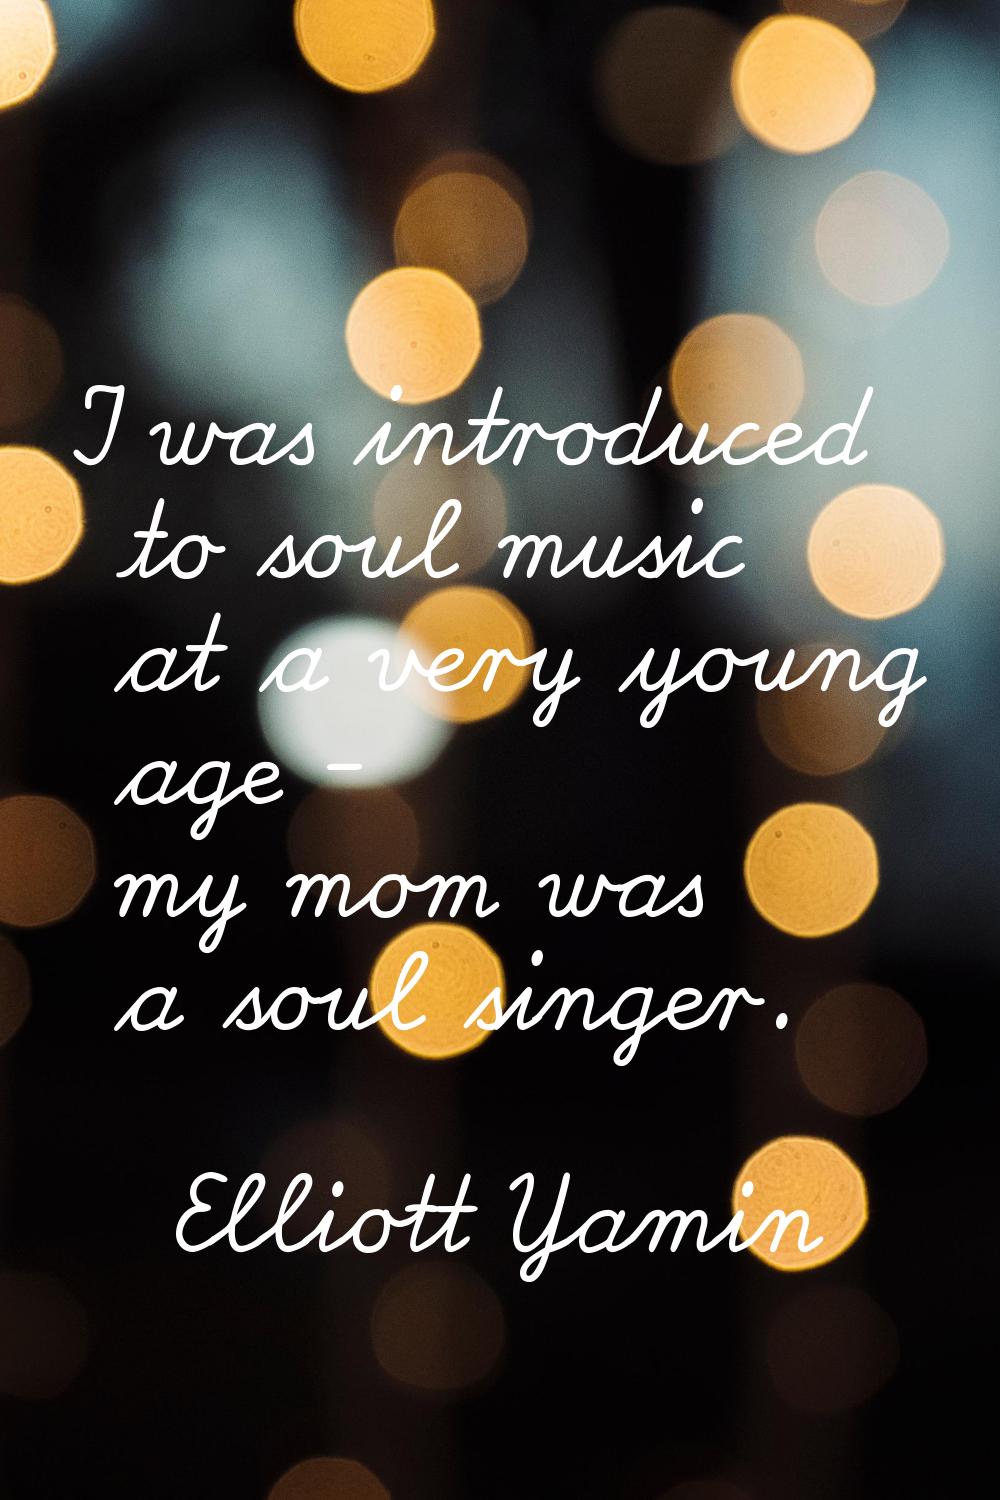 I was introduced to soul music at a very young age - my mom was a soul singer.